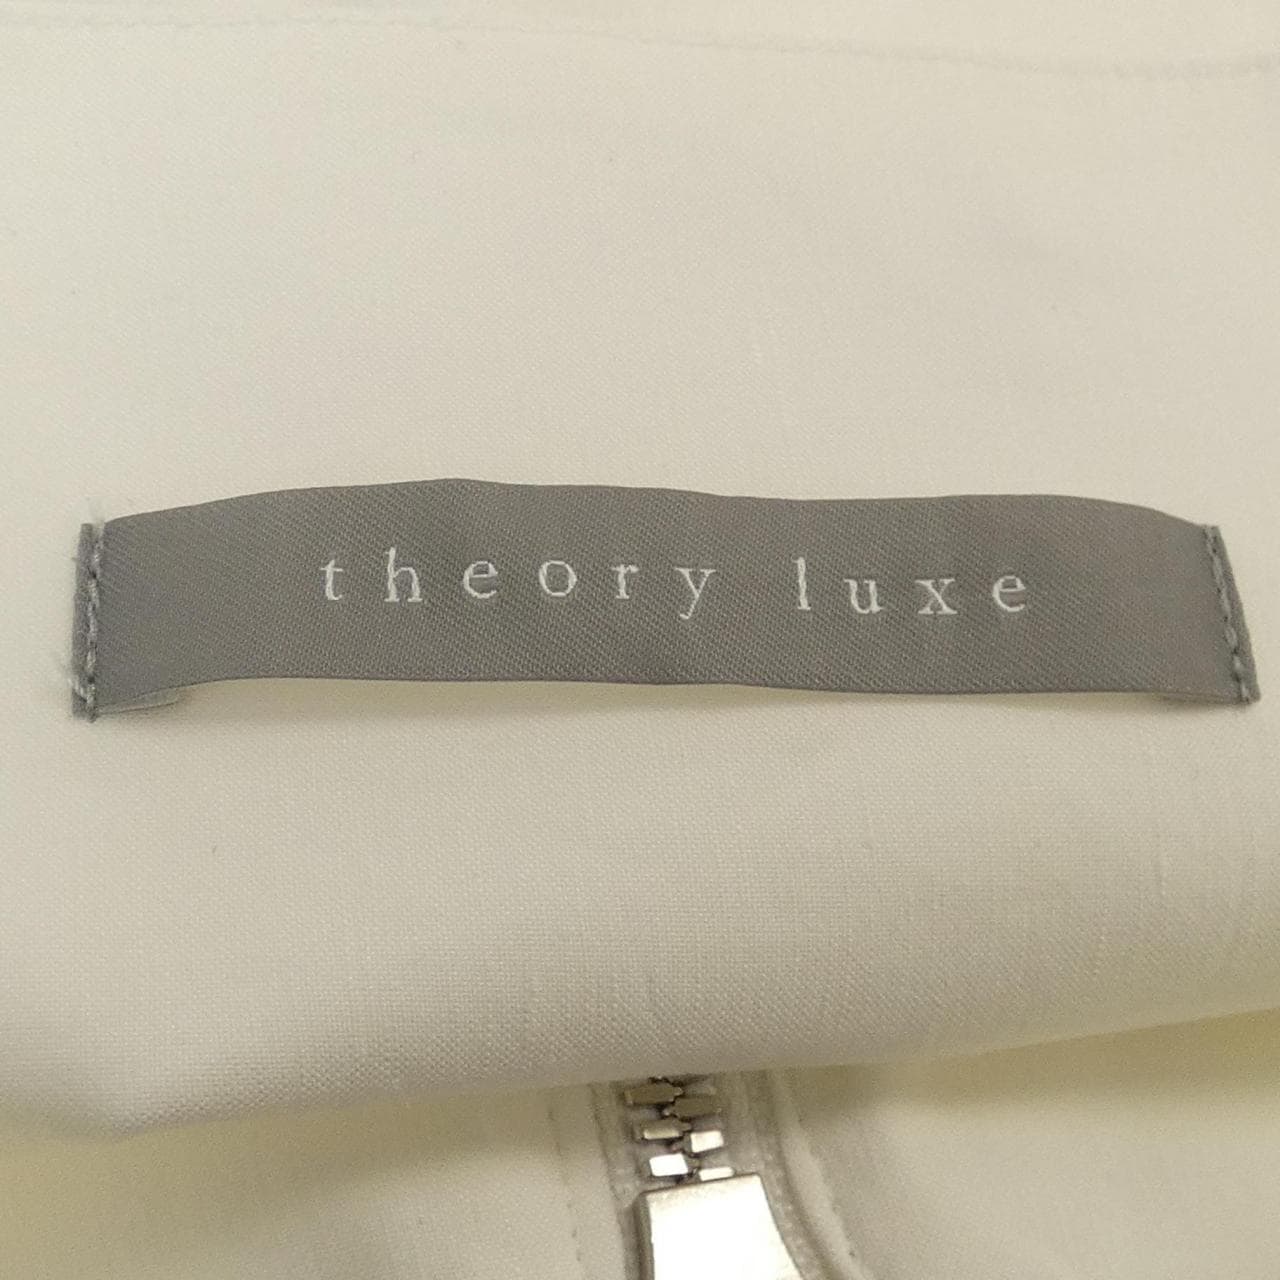 Theory luxe blouson